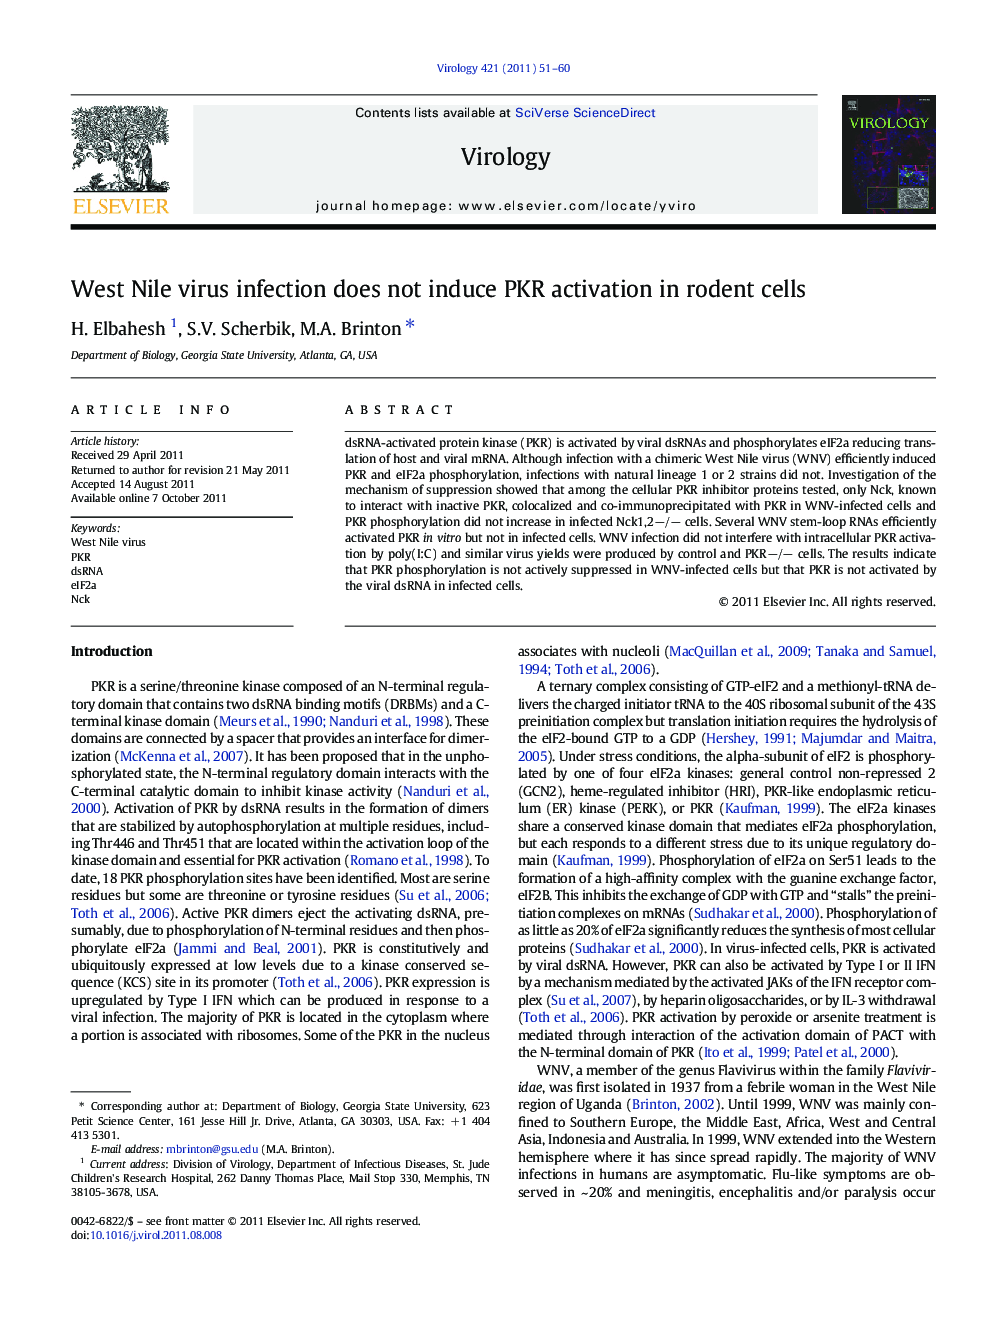 West Nile virus infection does not induce PKR activation in rodent cells